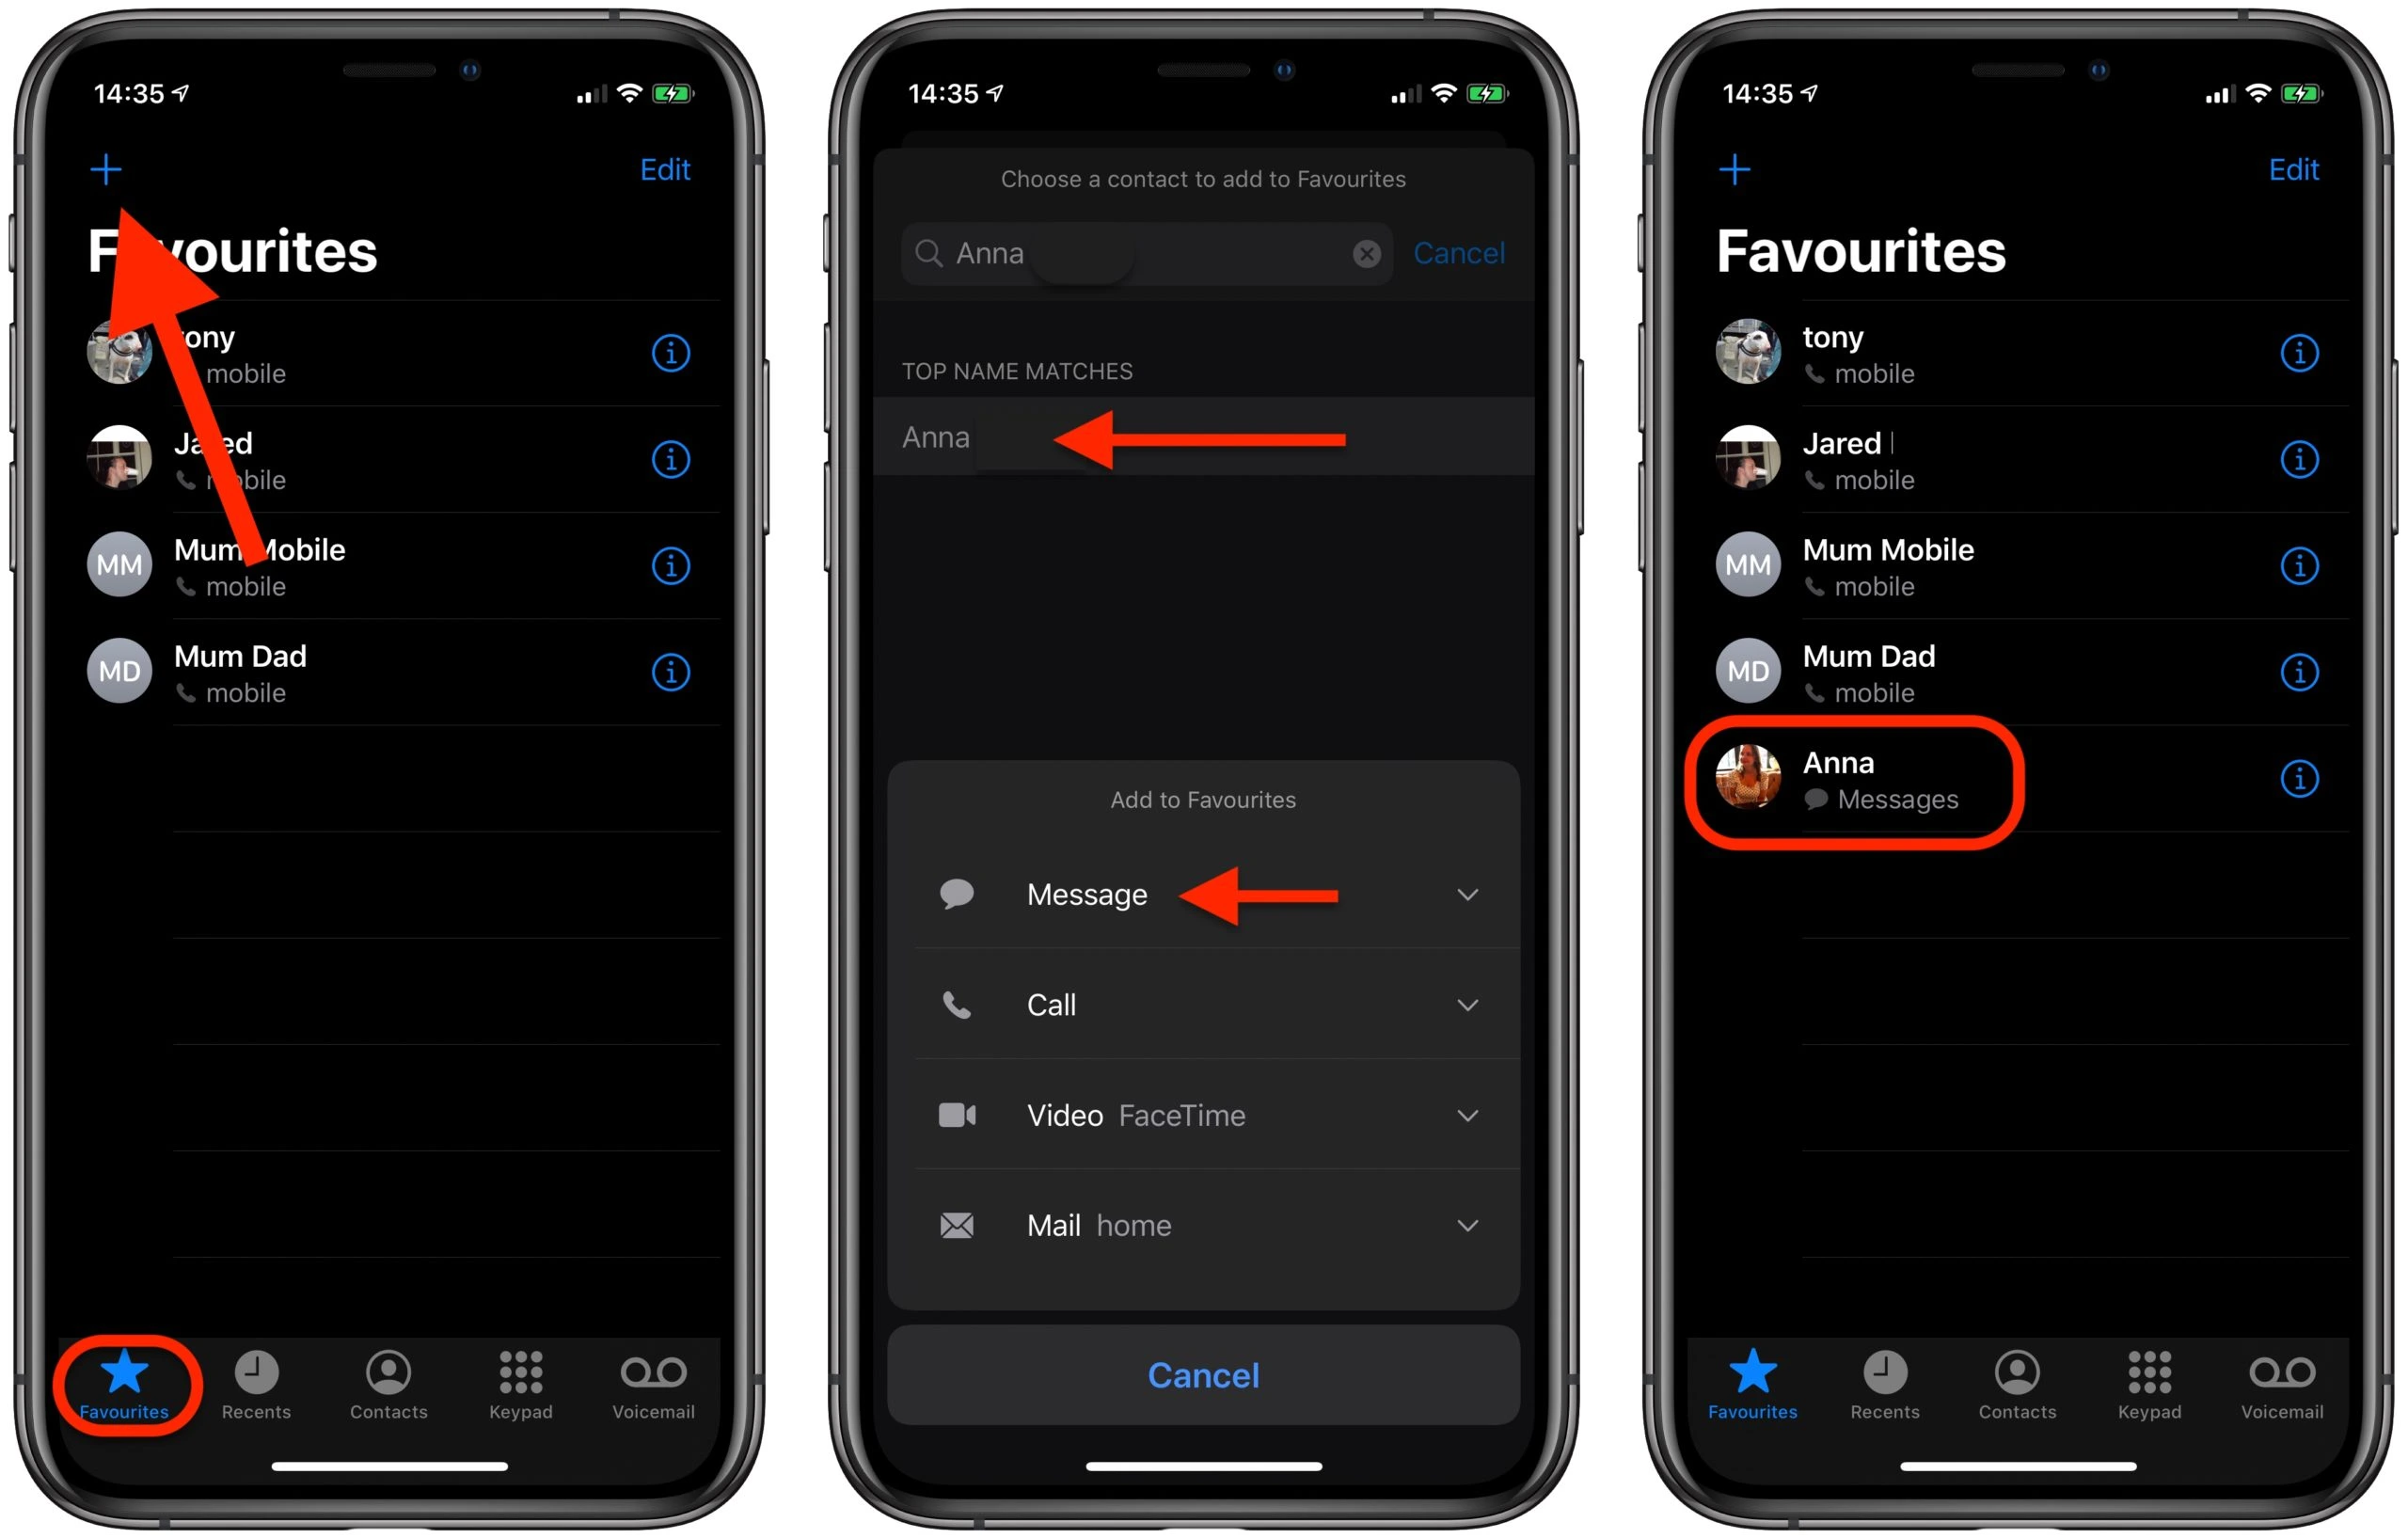 How to remove favorites on iPhone